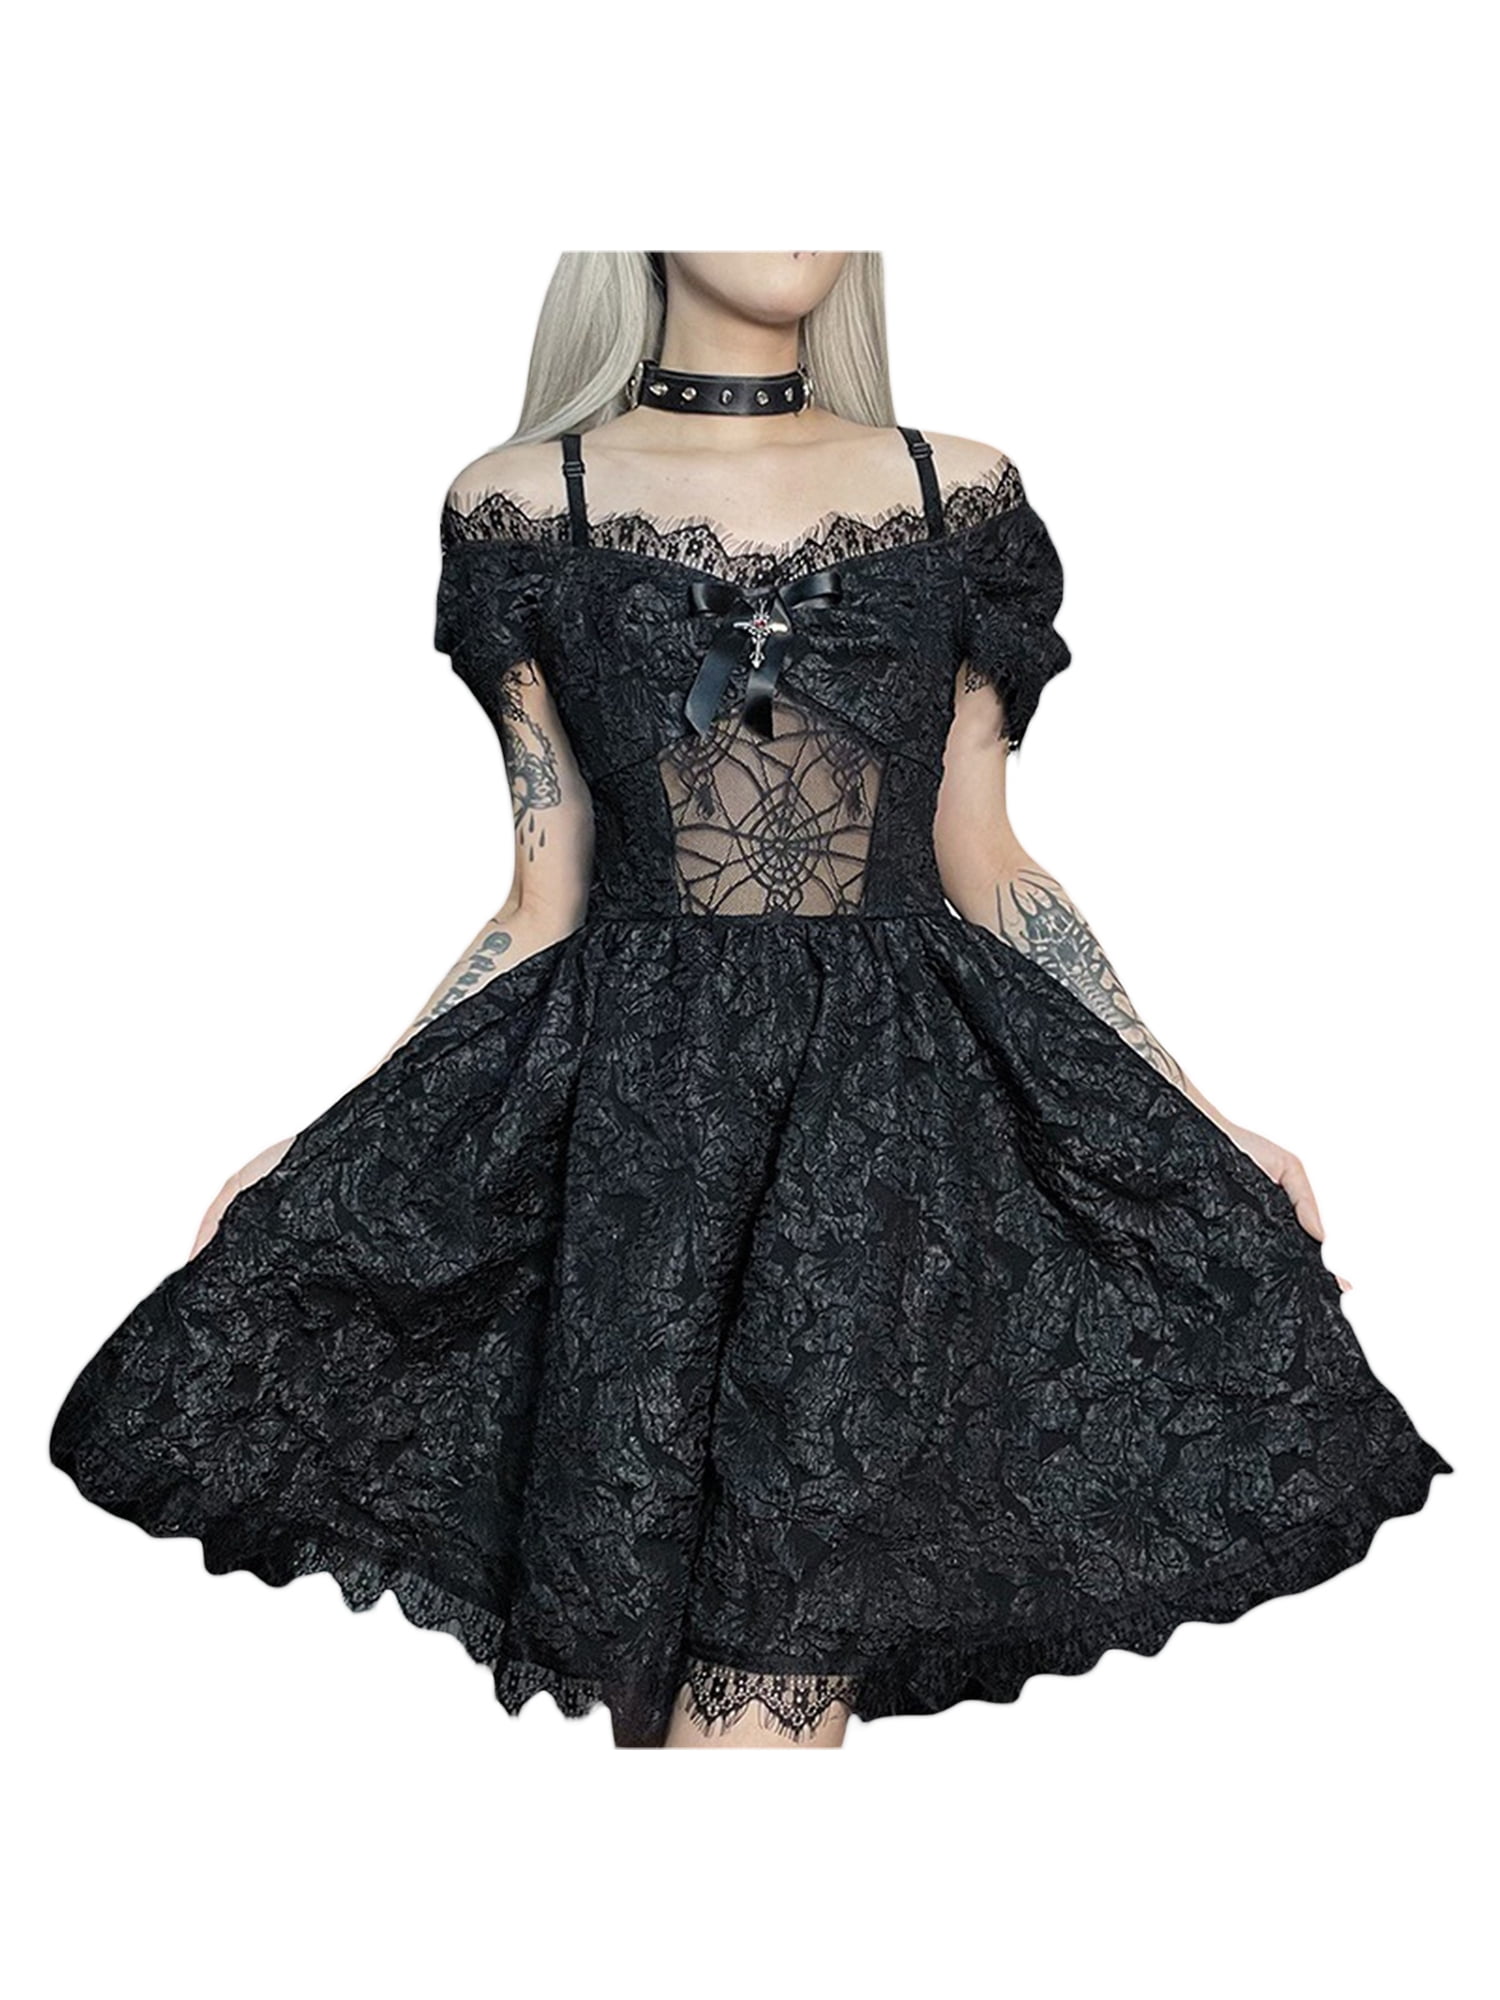 Harty Sexy Gothic Clothes for Women Gothic Decor Aesthetic Bla Gothic Dress  Plus Size Gothic Shorts for Women Bla Gothic Dress for Women Sexy Gothic